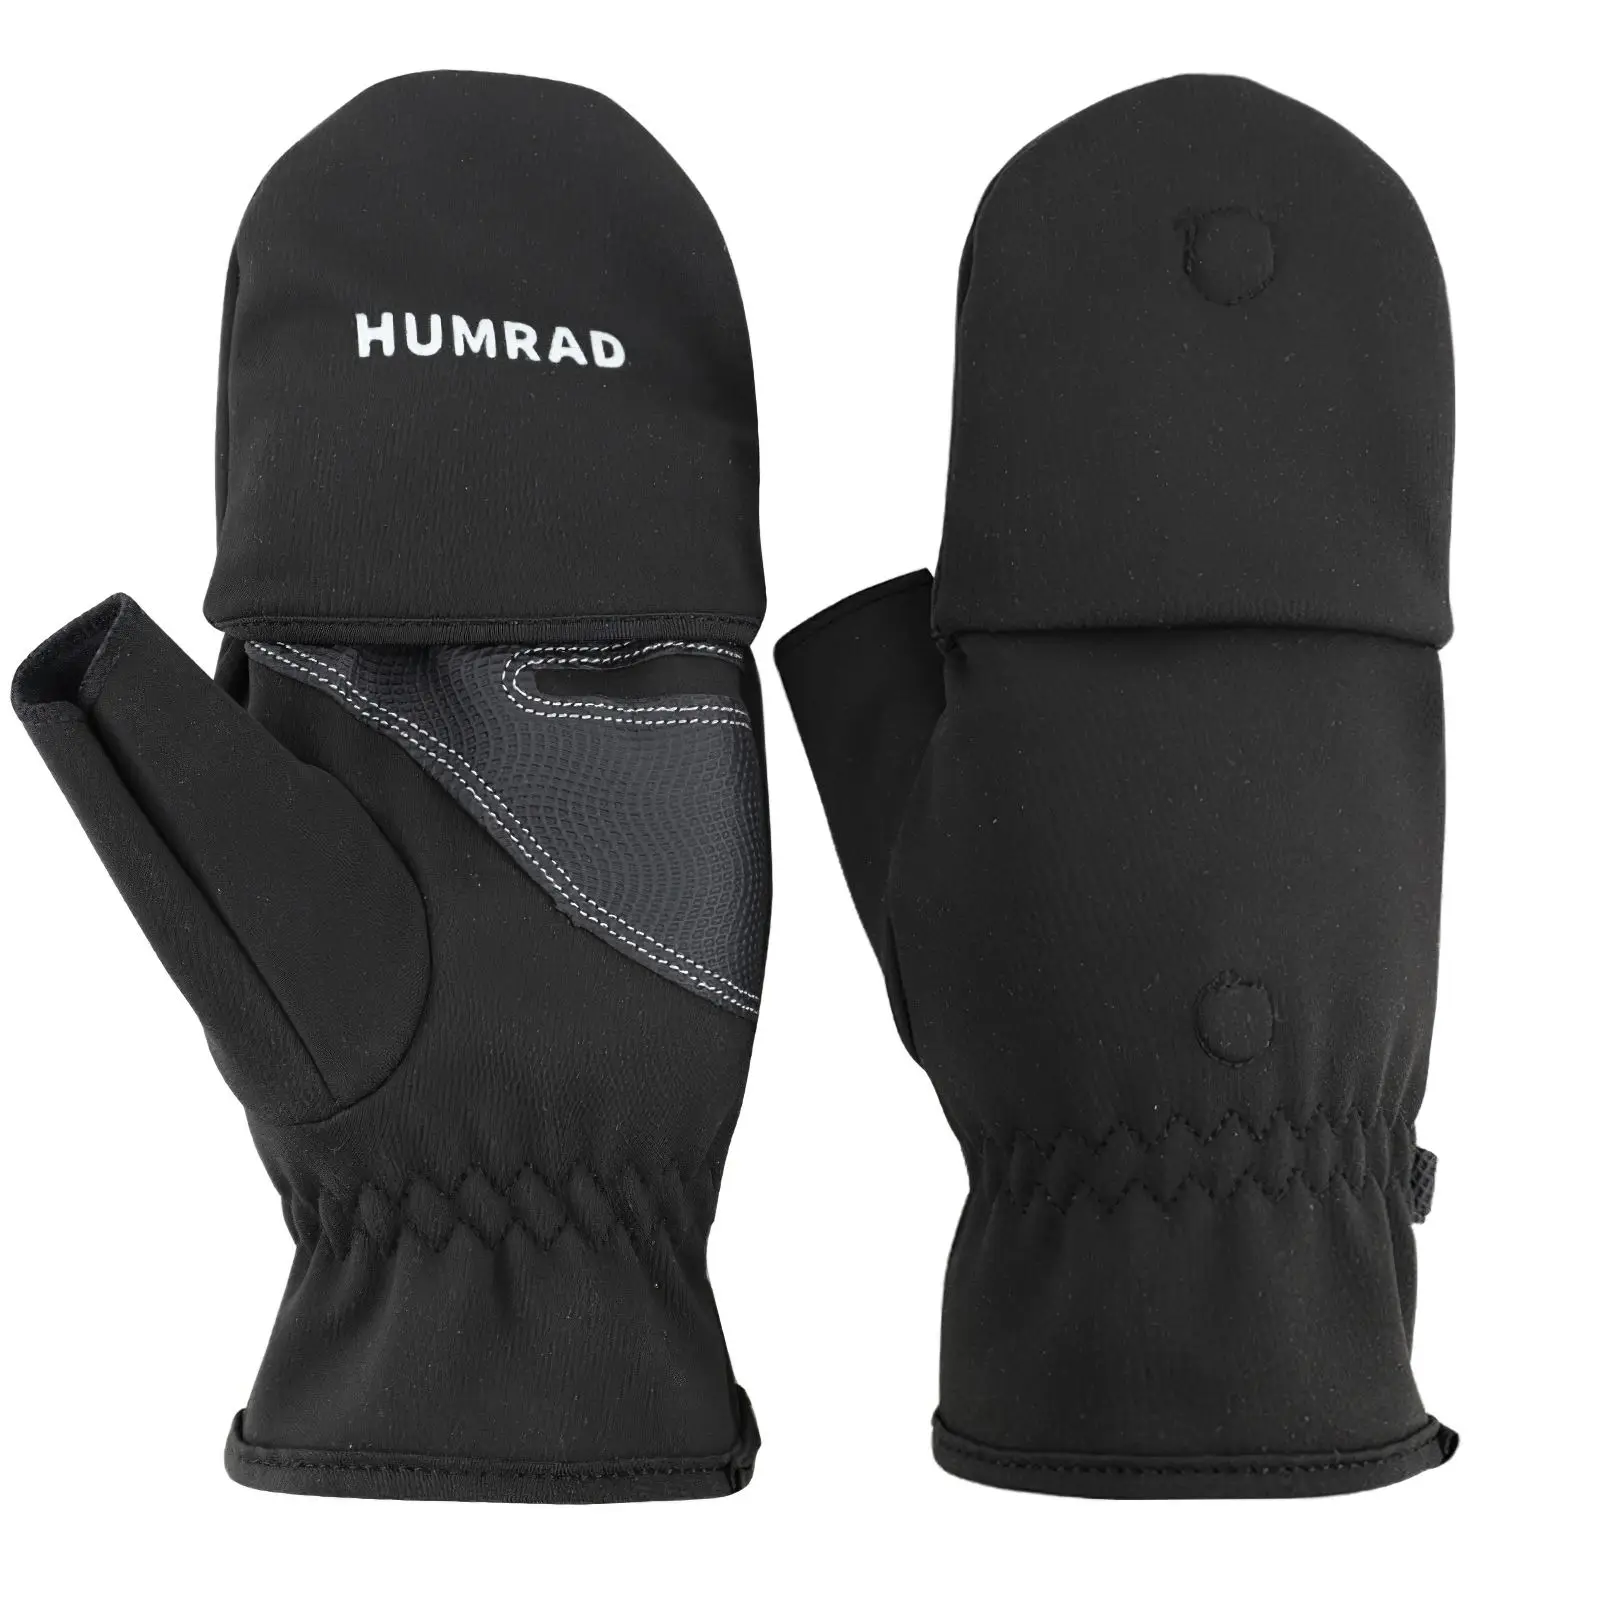 Details about   Outdoor Sports Half Finger Gloves Women Men Glove Motorcycle Cycling Mittens US